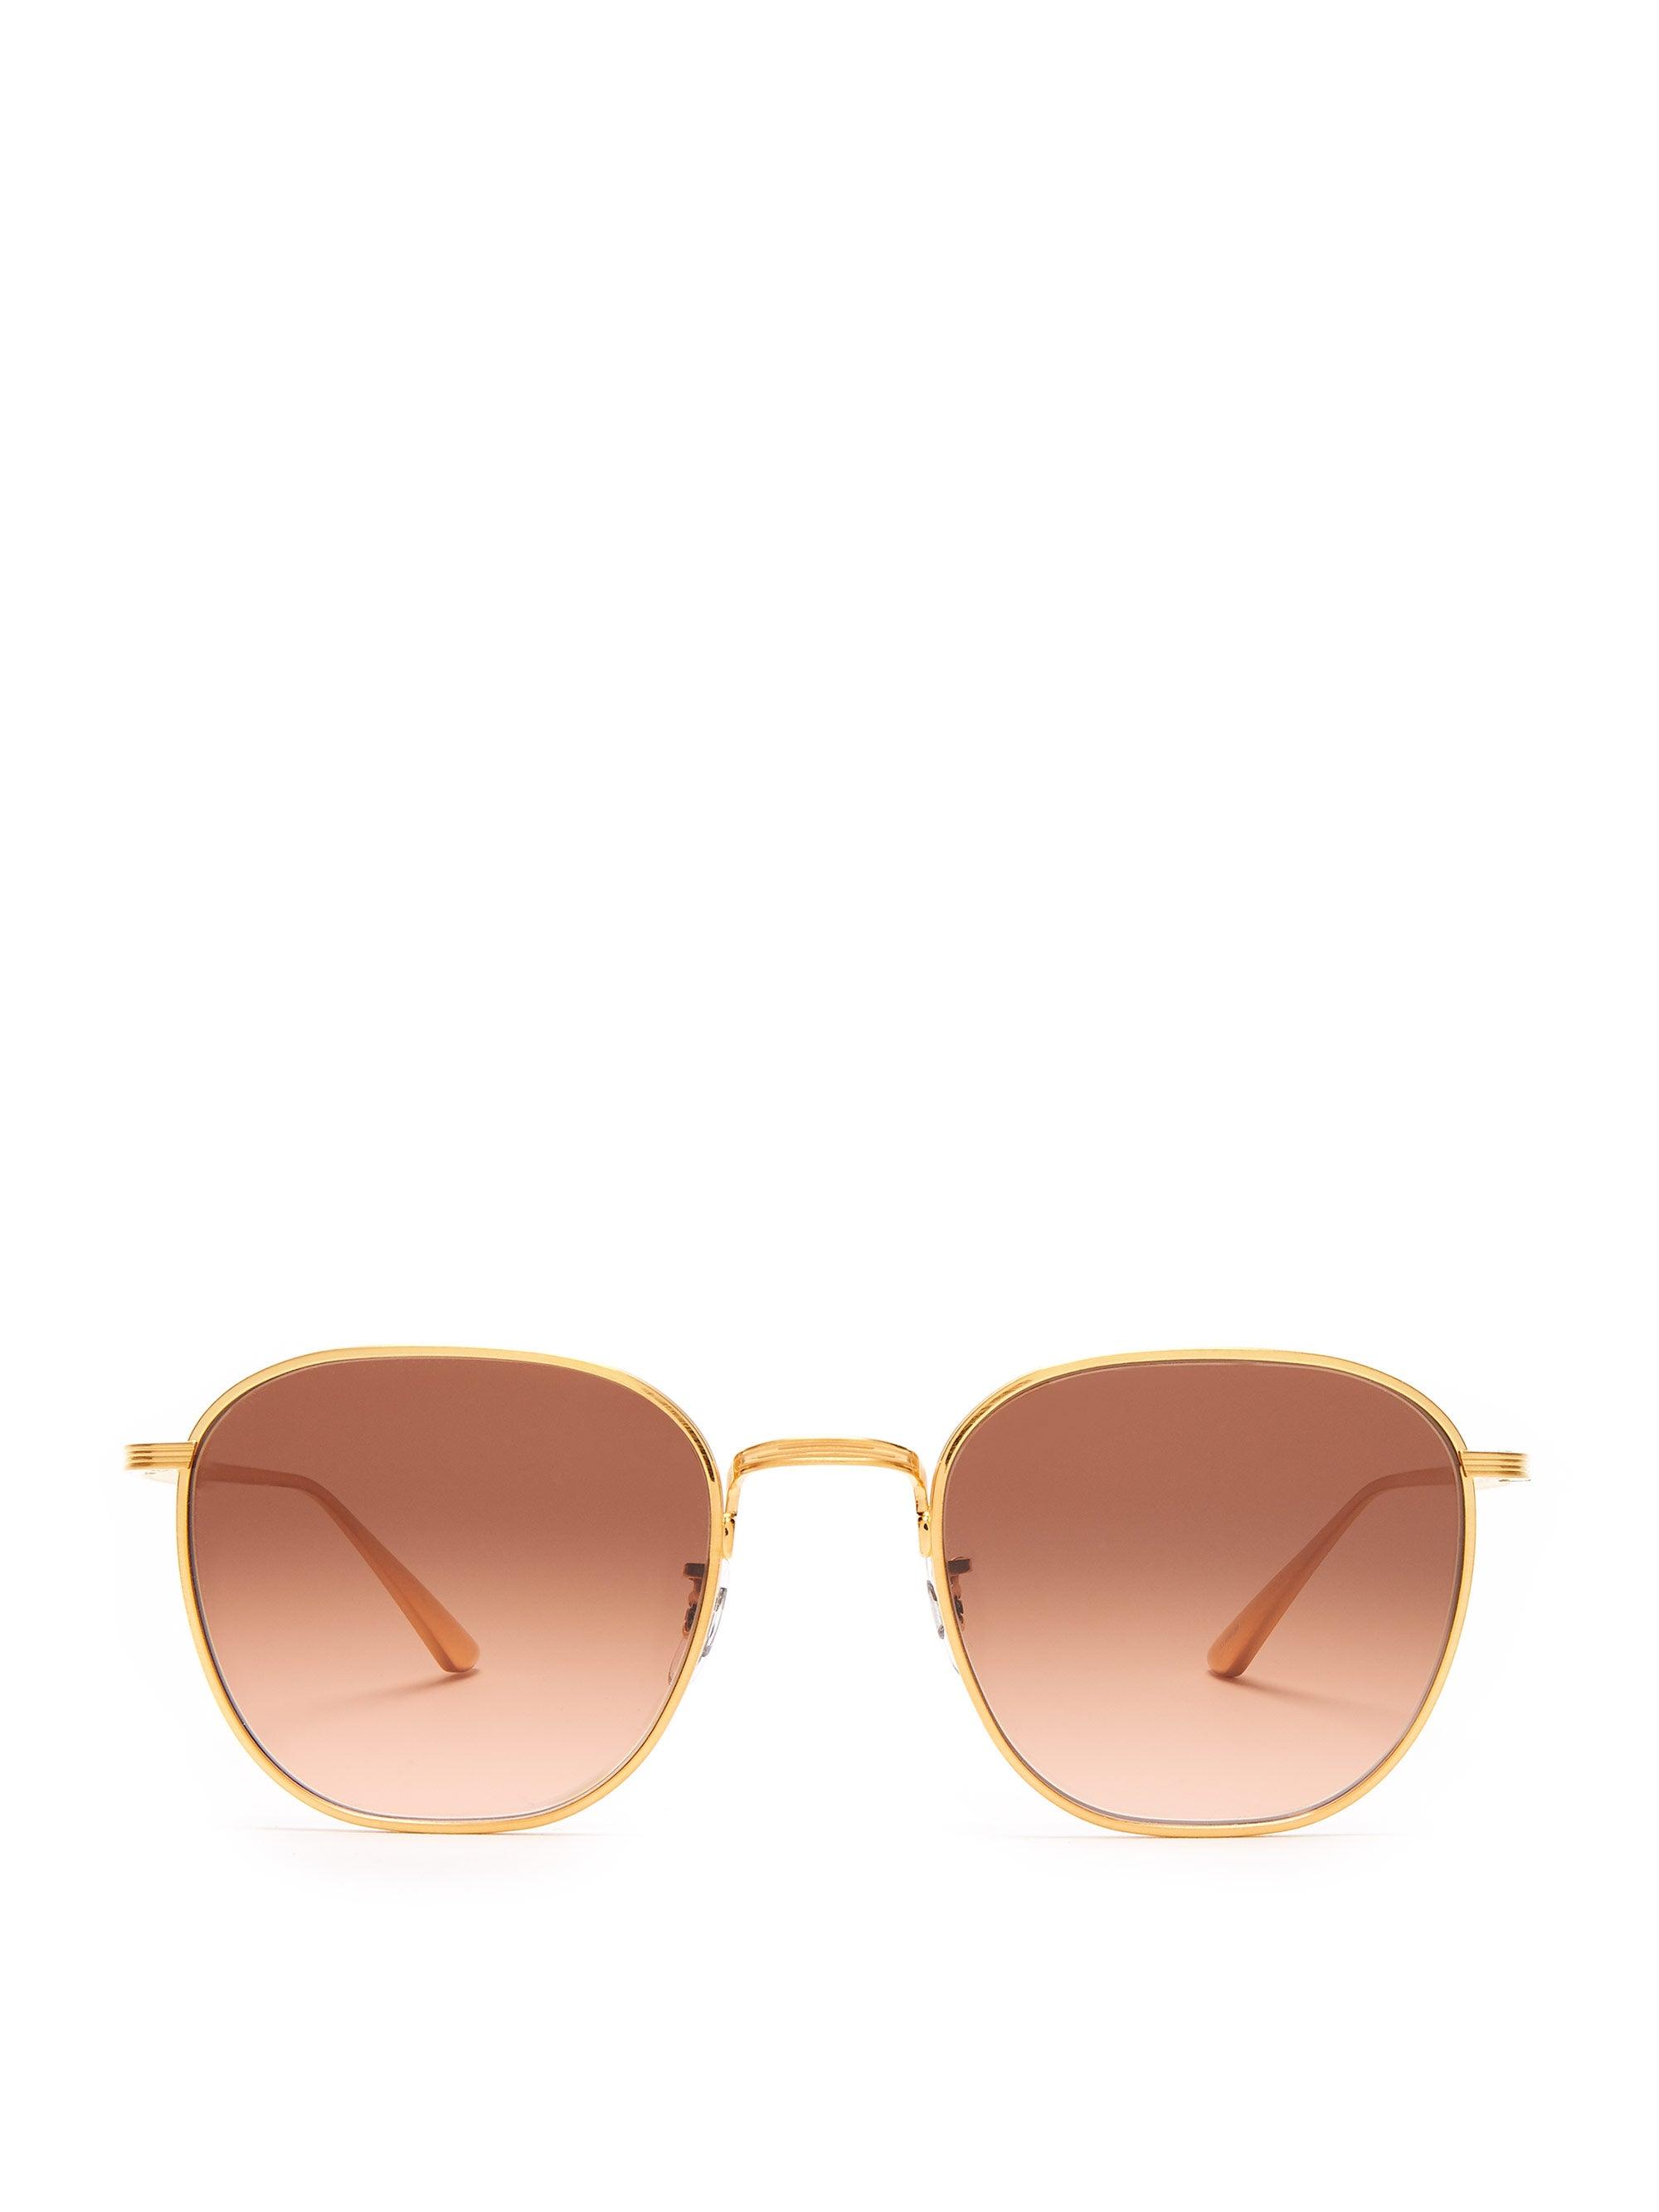 The Row X Oliver Peoples Board Meeting 2 Sunglasses in Metallic | Lyst